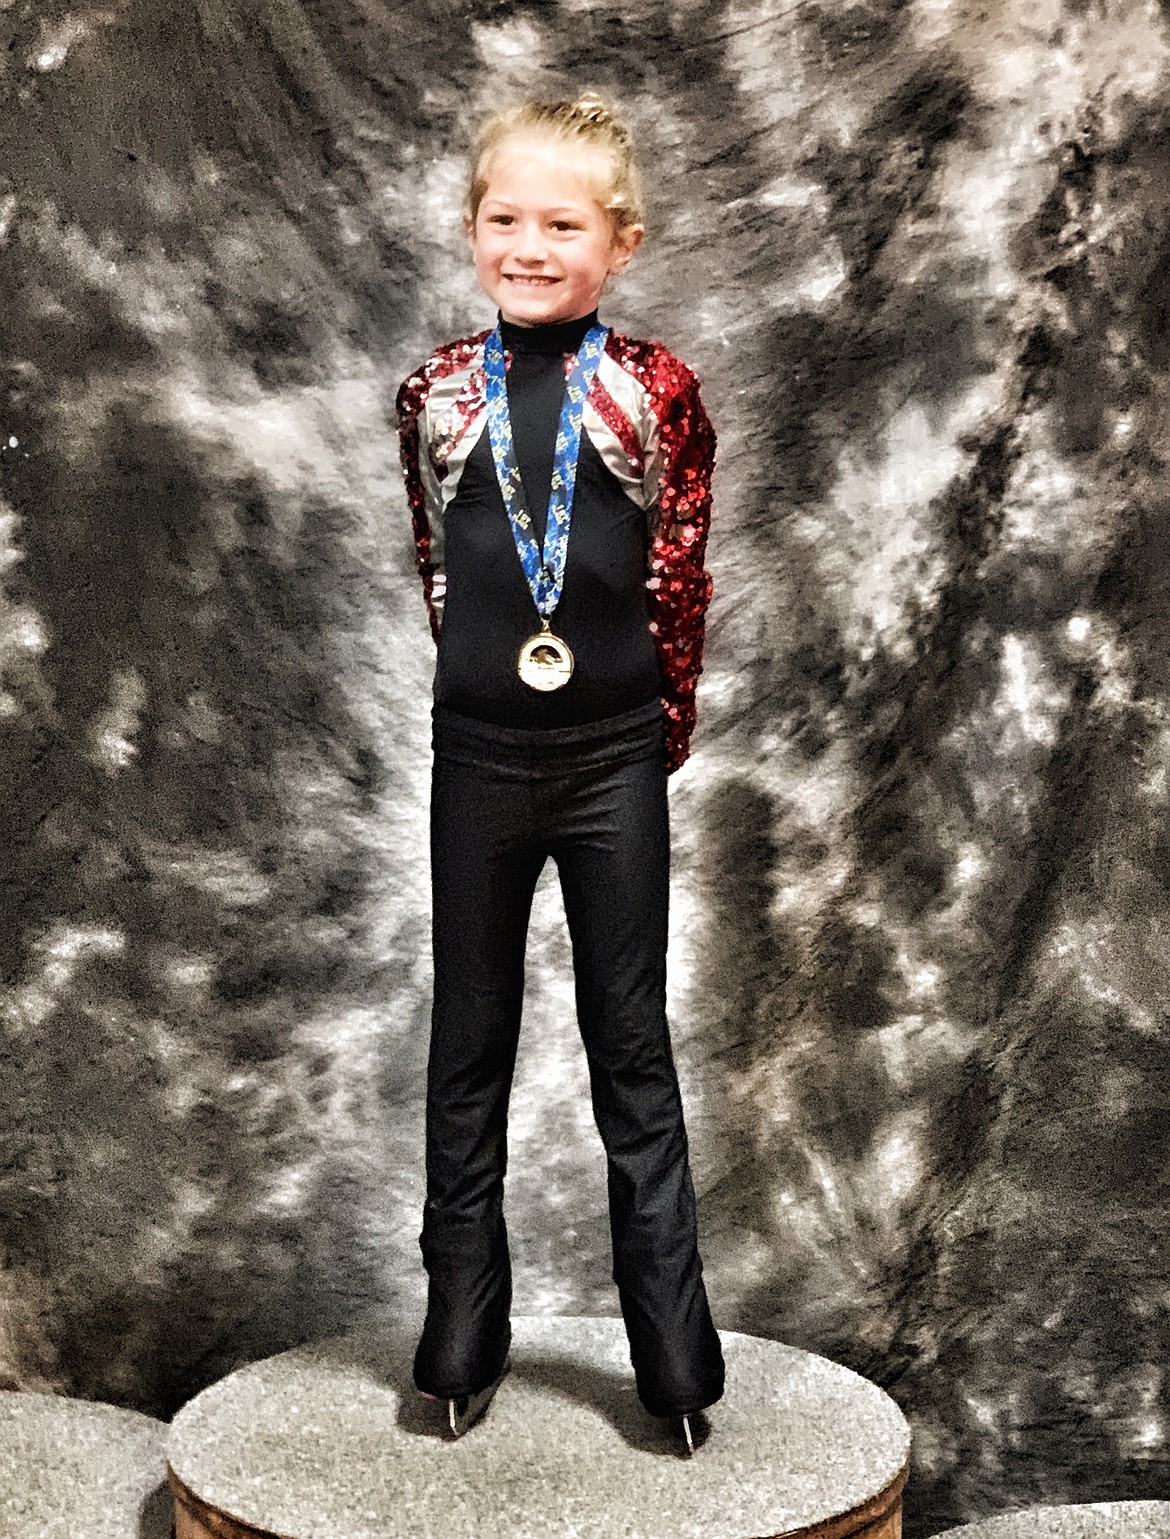 Gabriel Walrath earned first place during a skating competition in Missoula. (Courtesy photo)